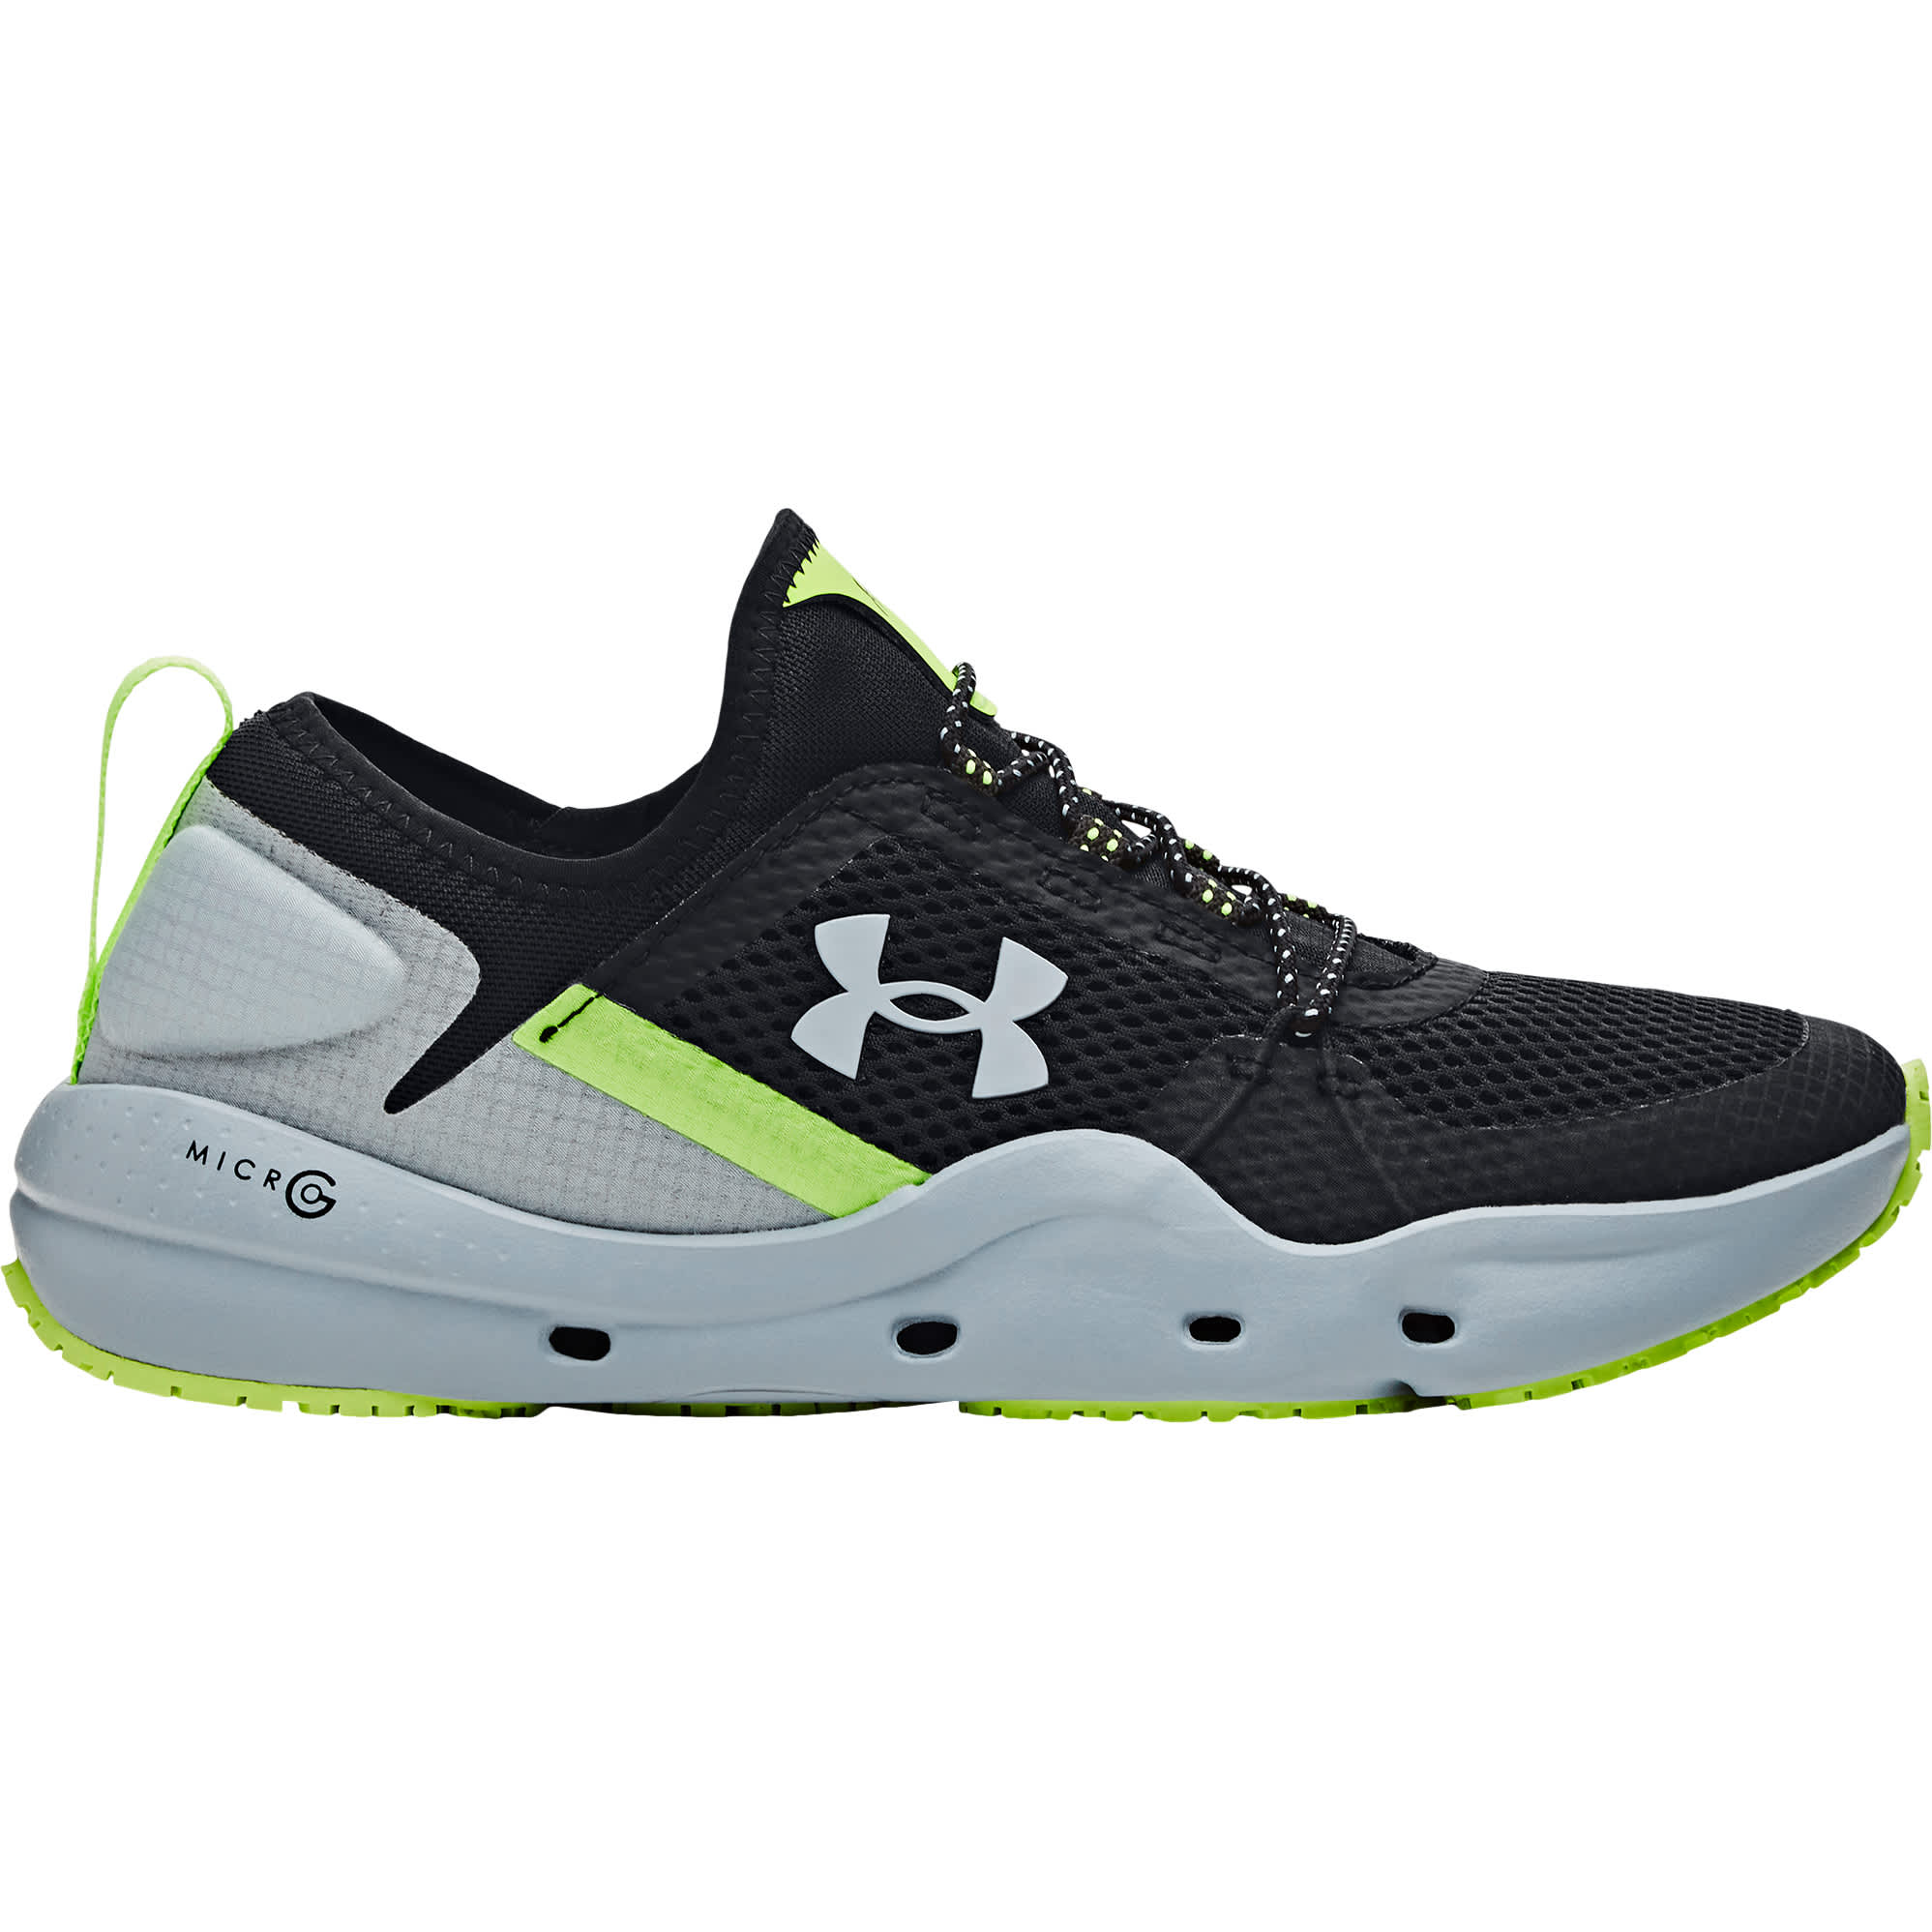 Under Armour® Men’s Micro G® Kilchis Fishing Shoes